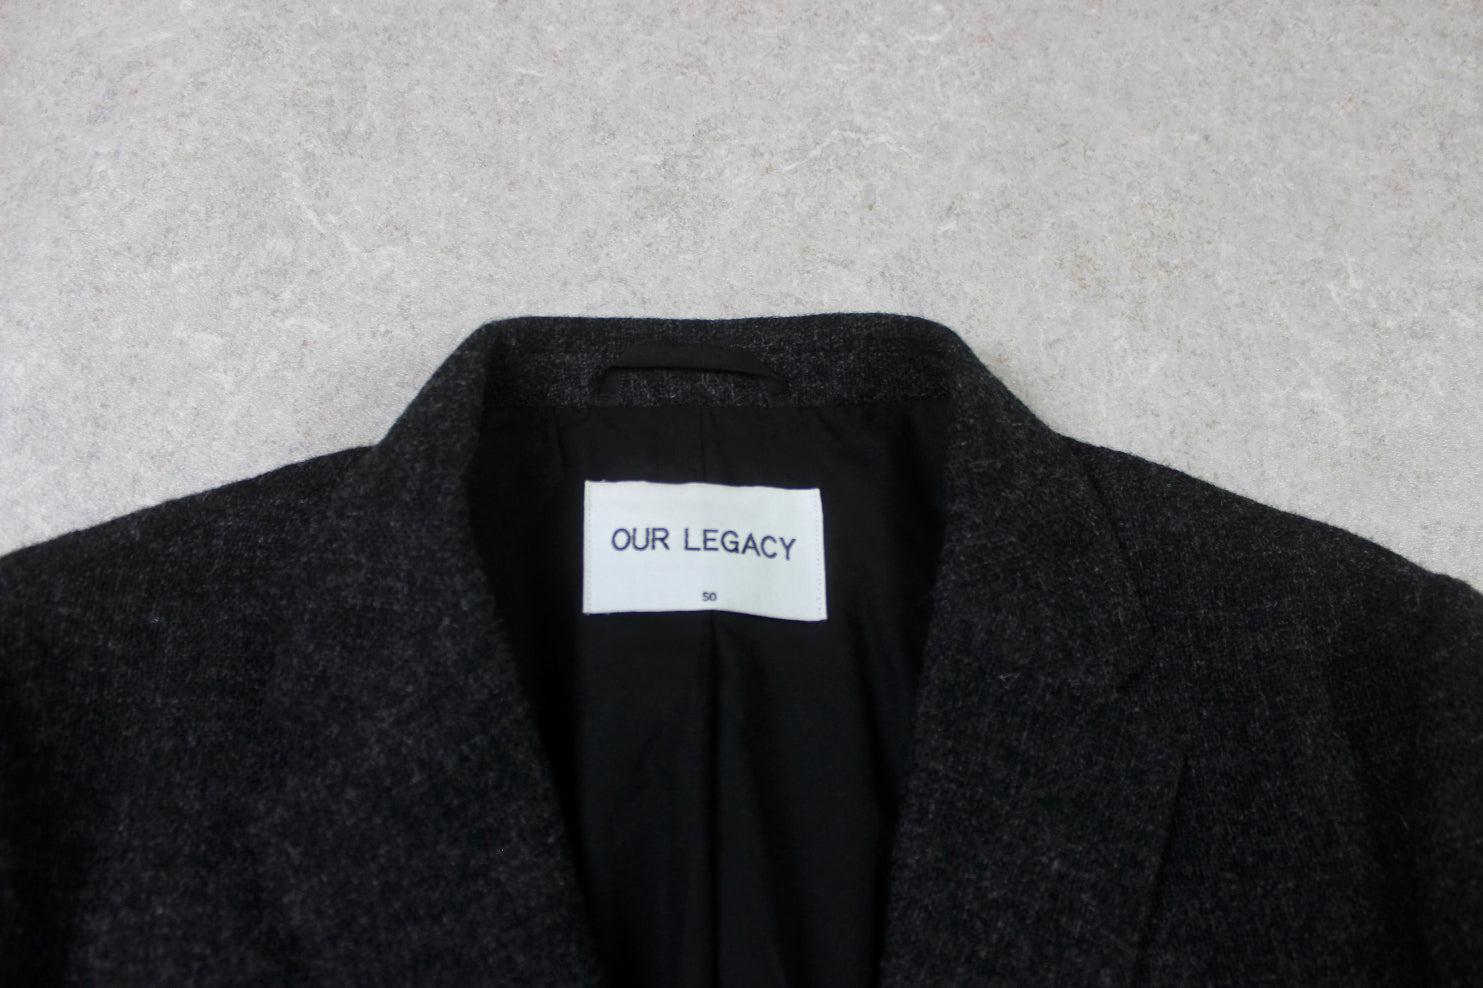 Our Legacy - 100% Virgin Wool Suit - Charcoal Grey - 50/Large